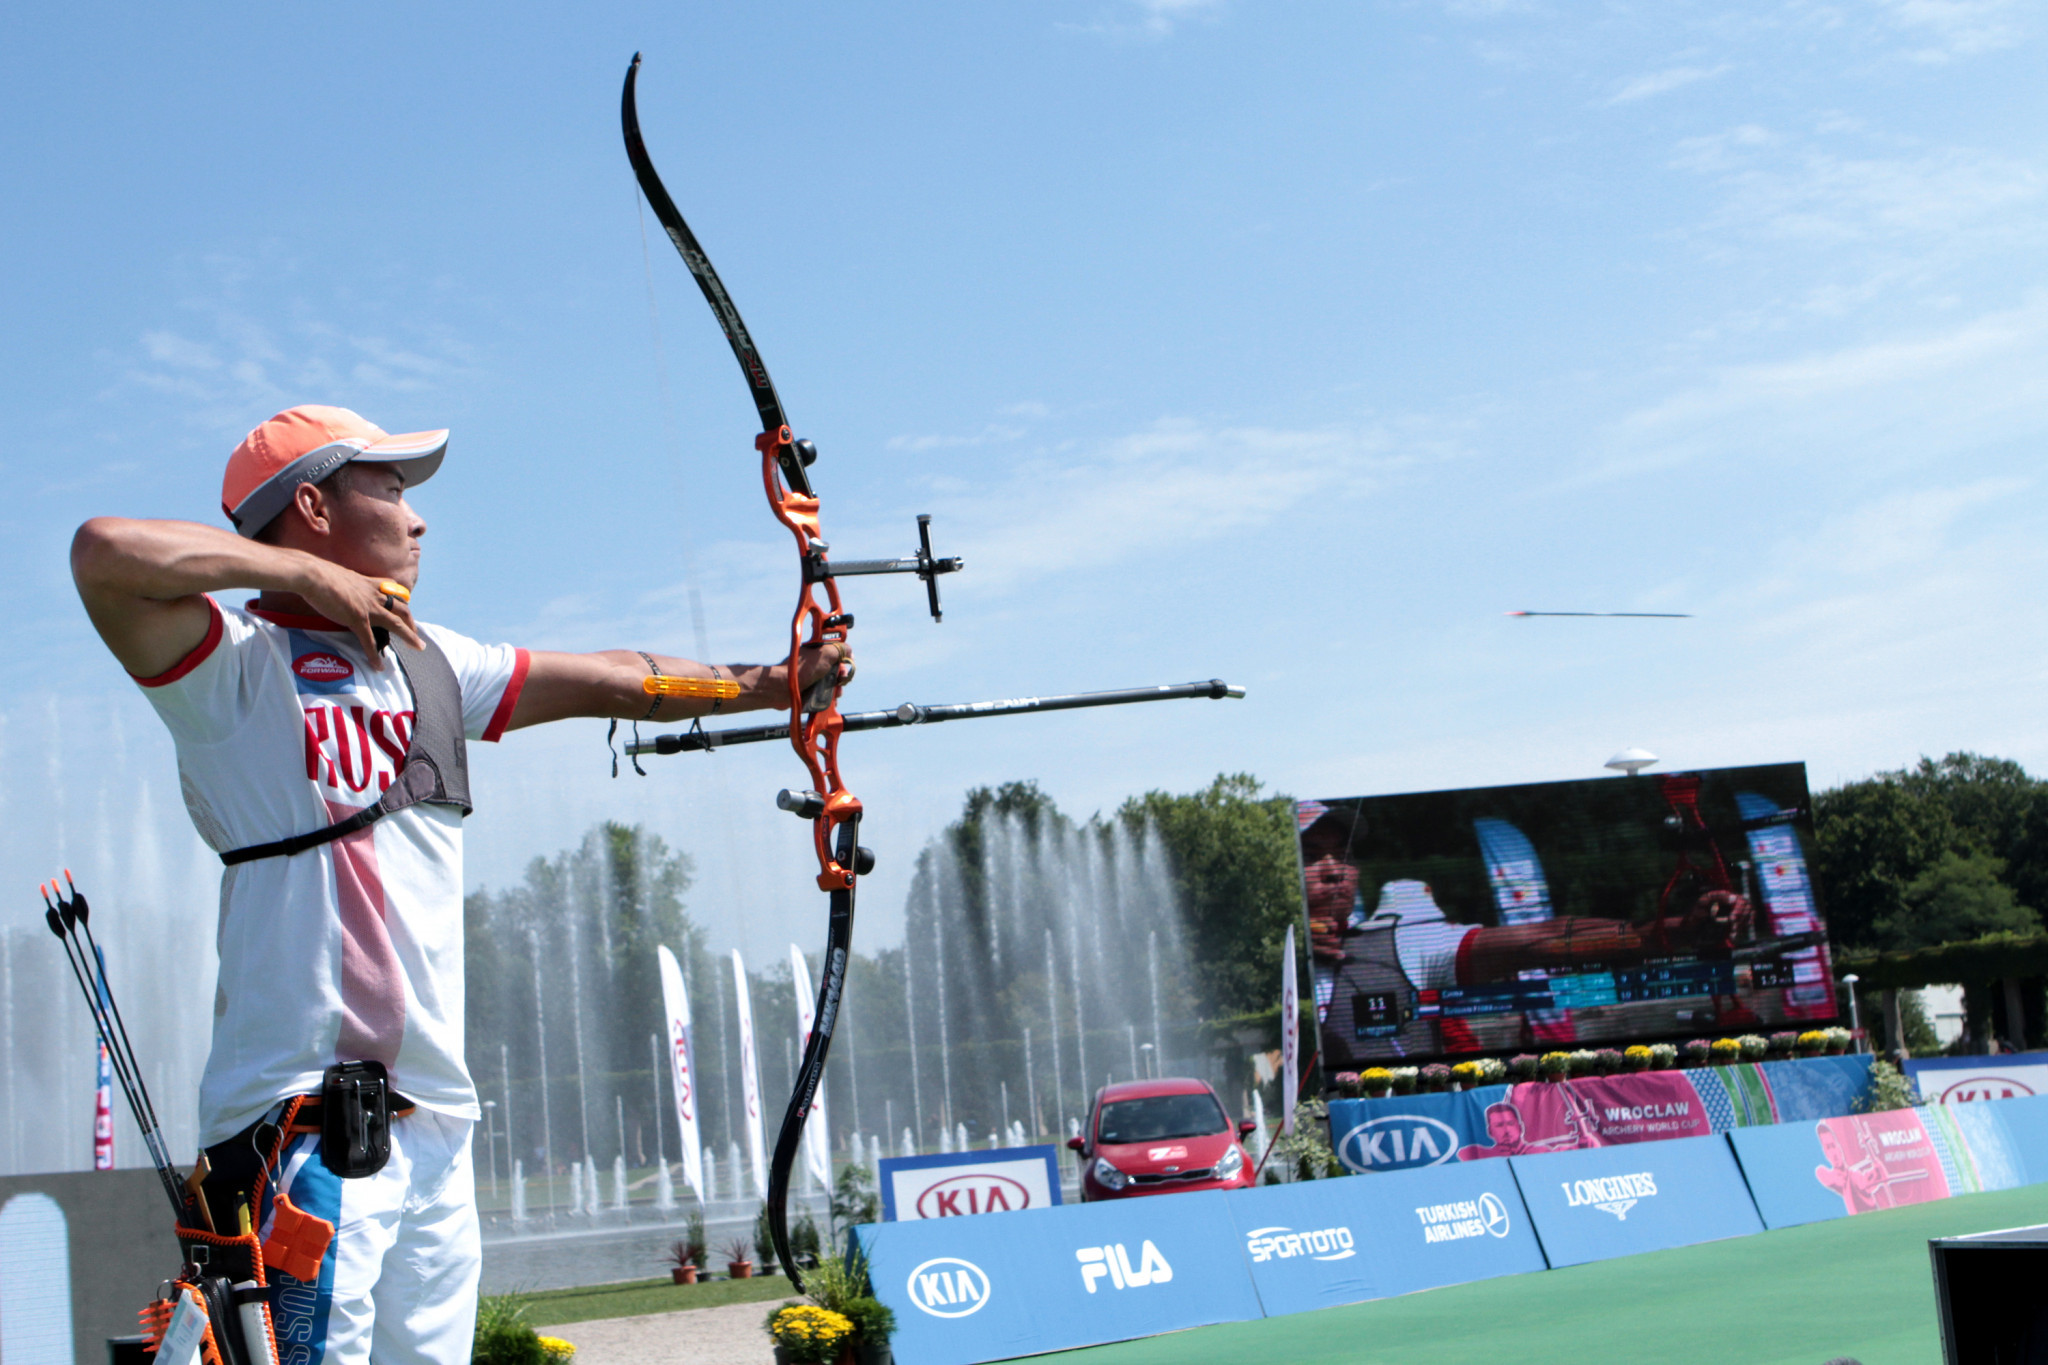 Wrocław has previously hosted the Archery World Cup and archery events at the World Games, with other competitions held in nearby Legnica ©Getty Images